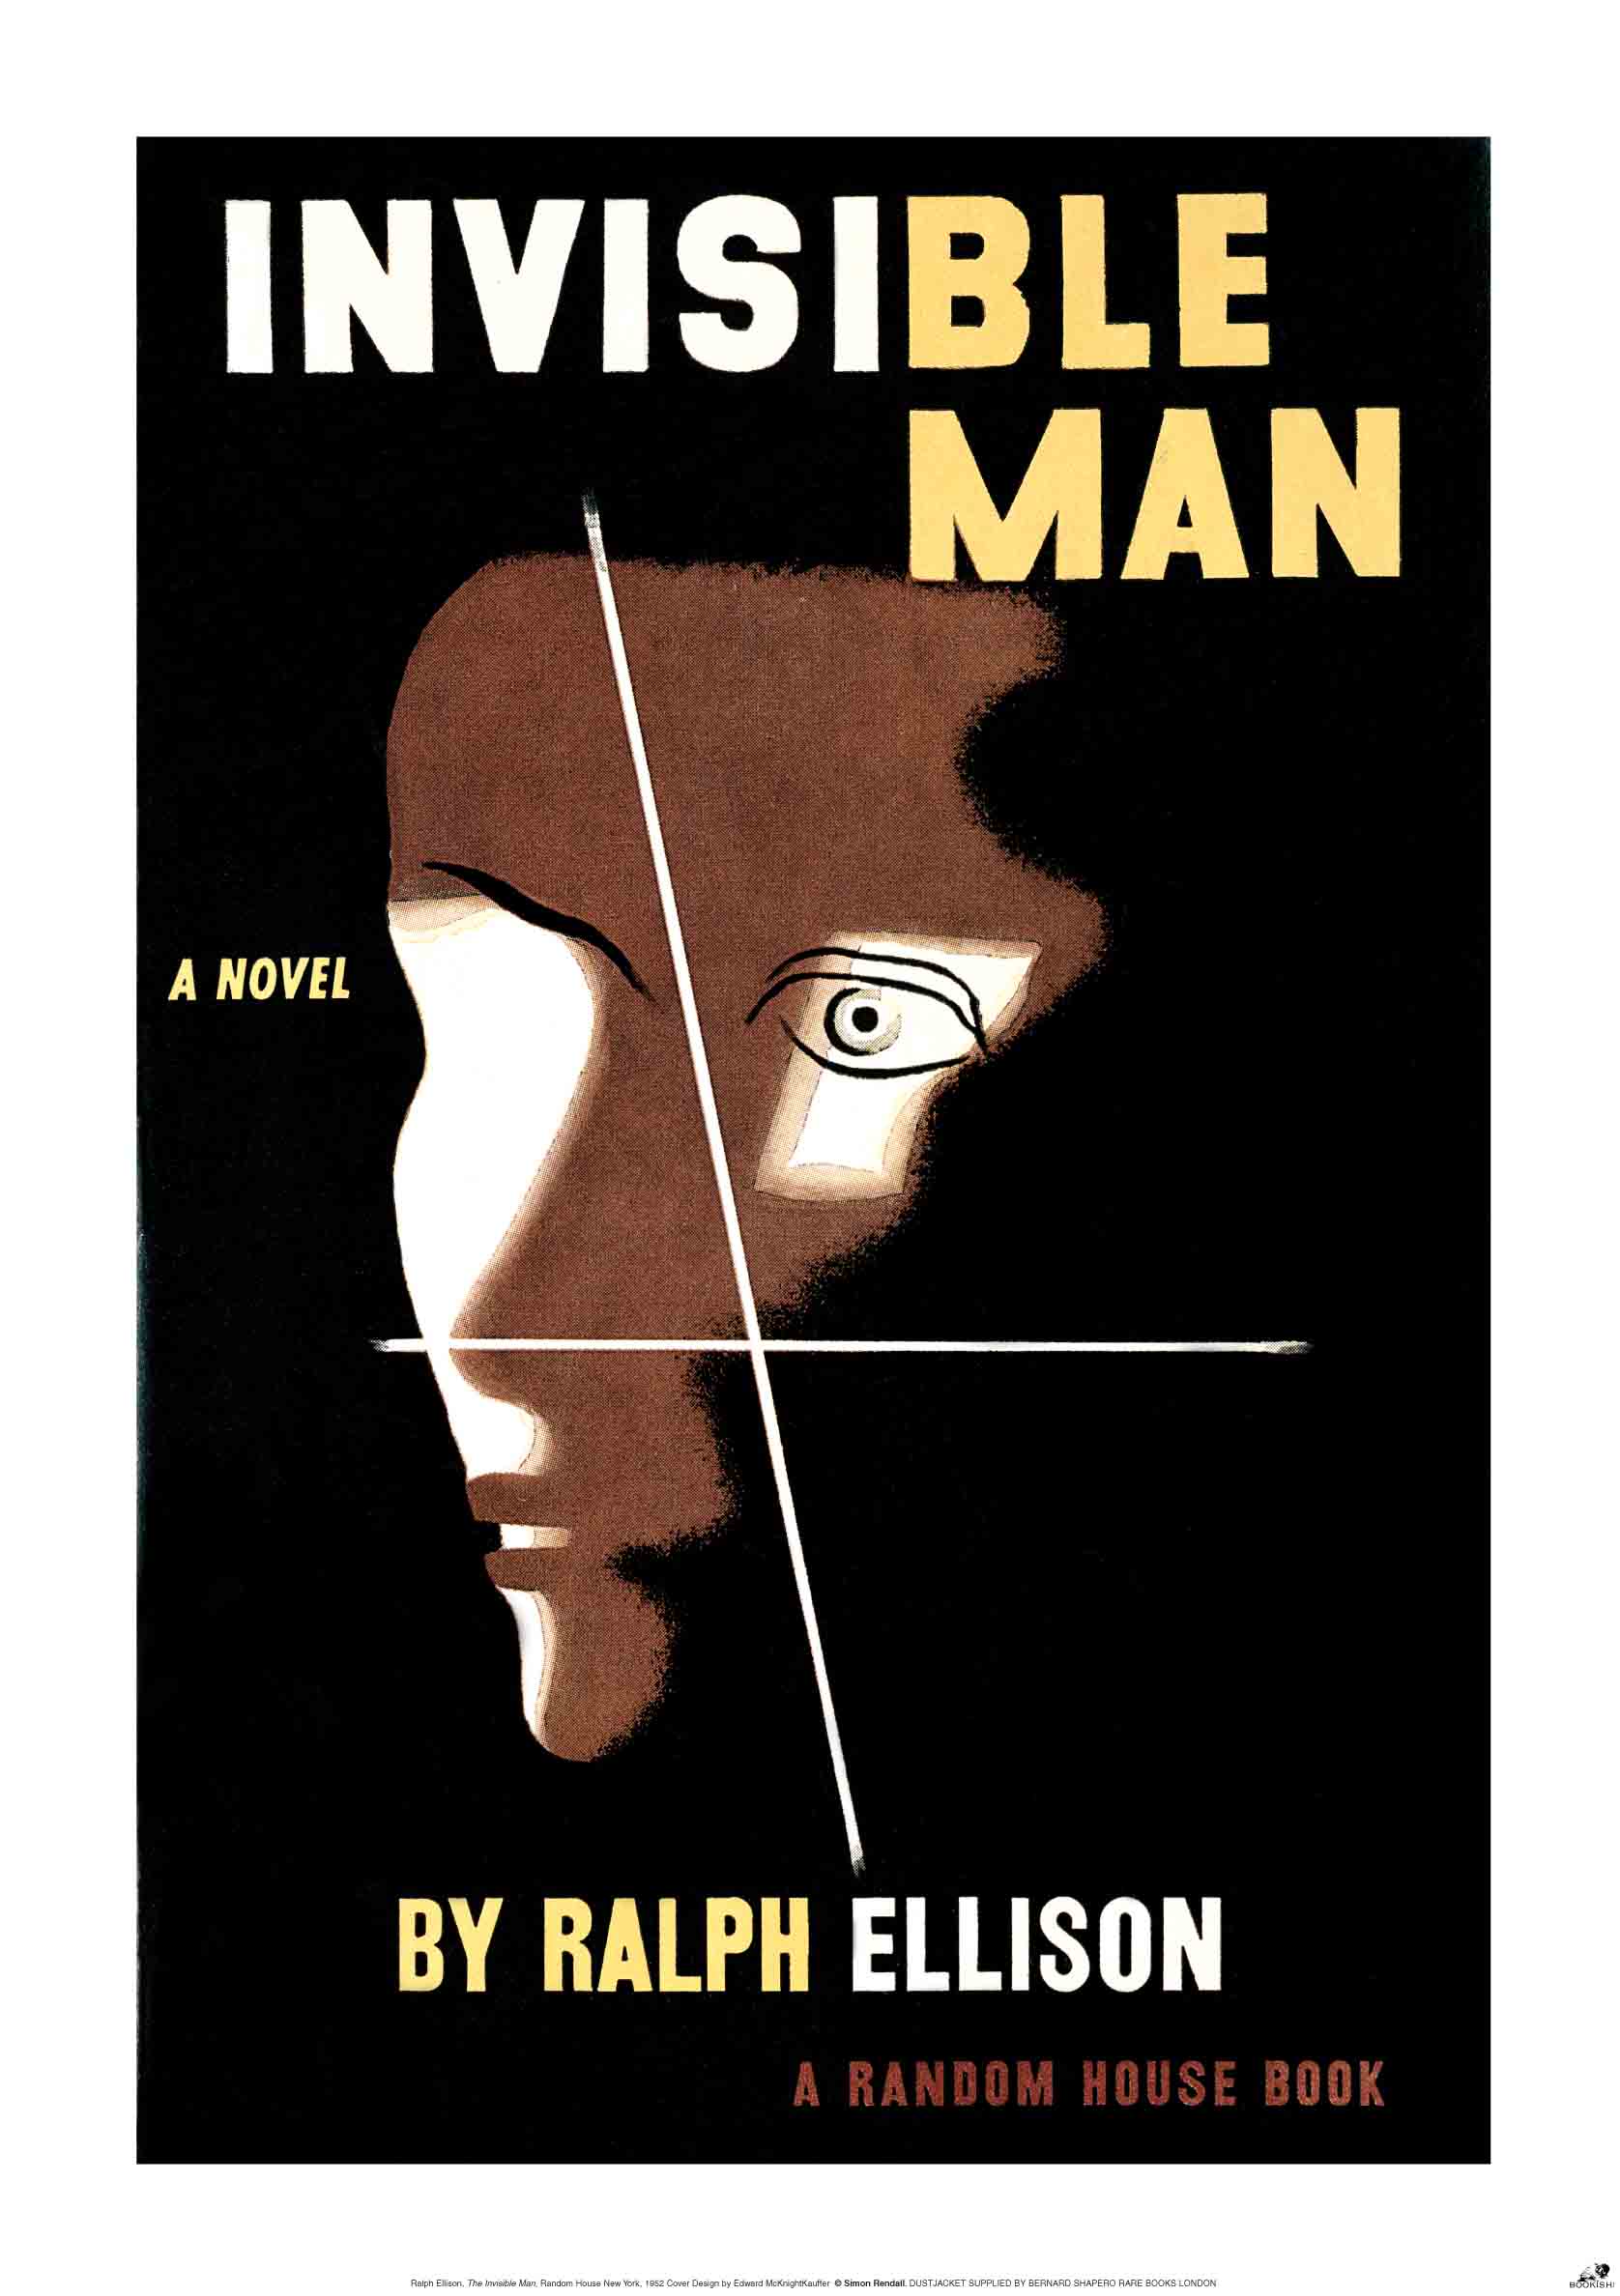 The realism of our society in ralph ellisons invisible man